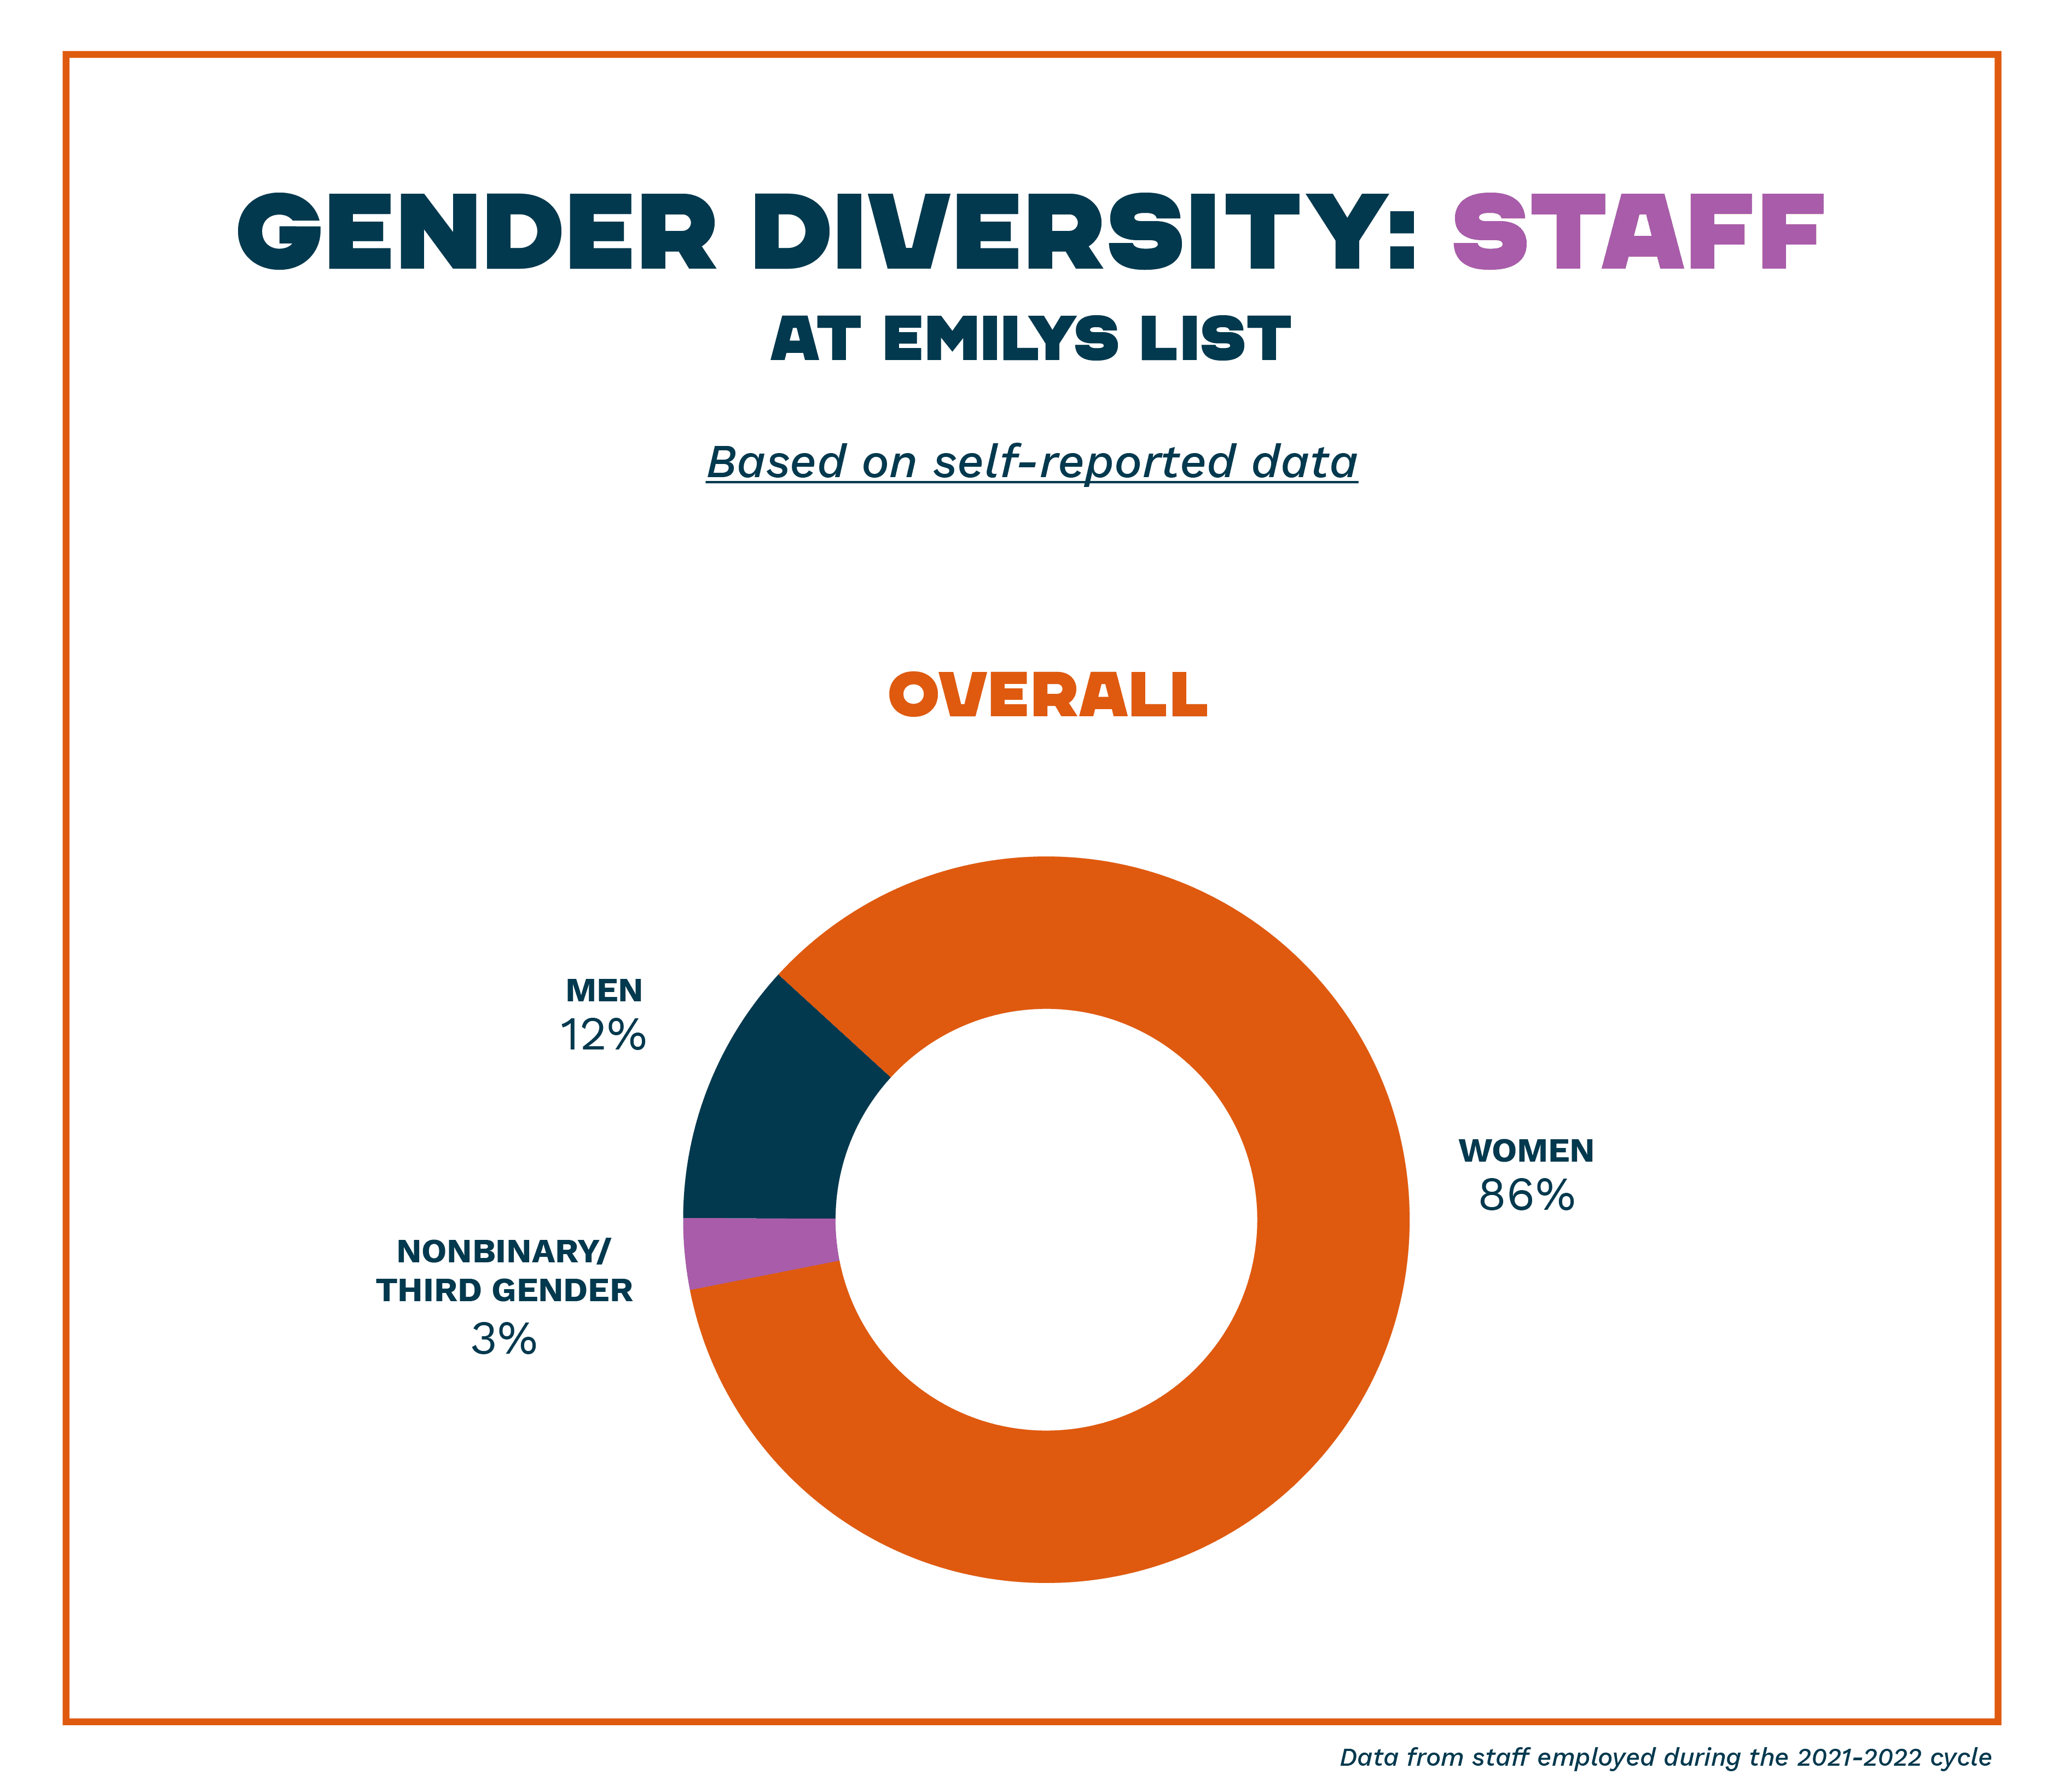 Gender Diversity: Staff at EMILYs List - Based on self-reported staff data - Overall: Women 86%, Men 12%, Nonbinary/Third Gender 3% - Data from staff employed during the 2021-2022 cycle